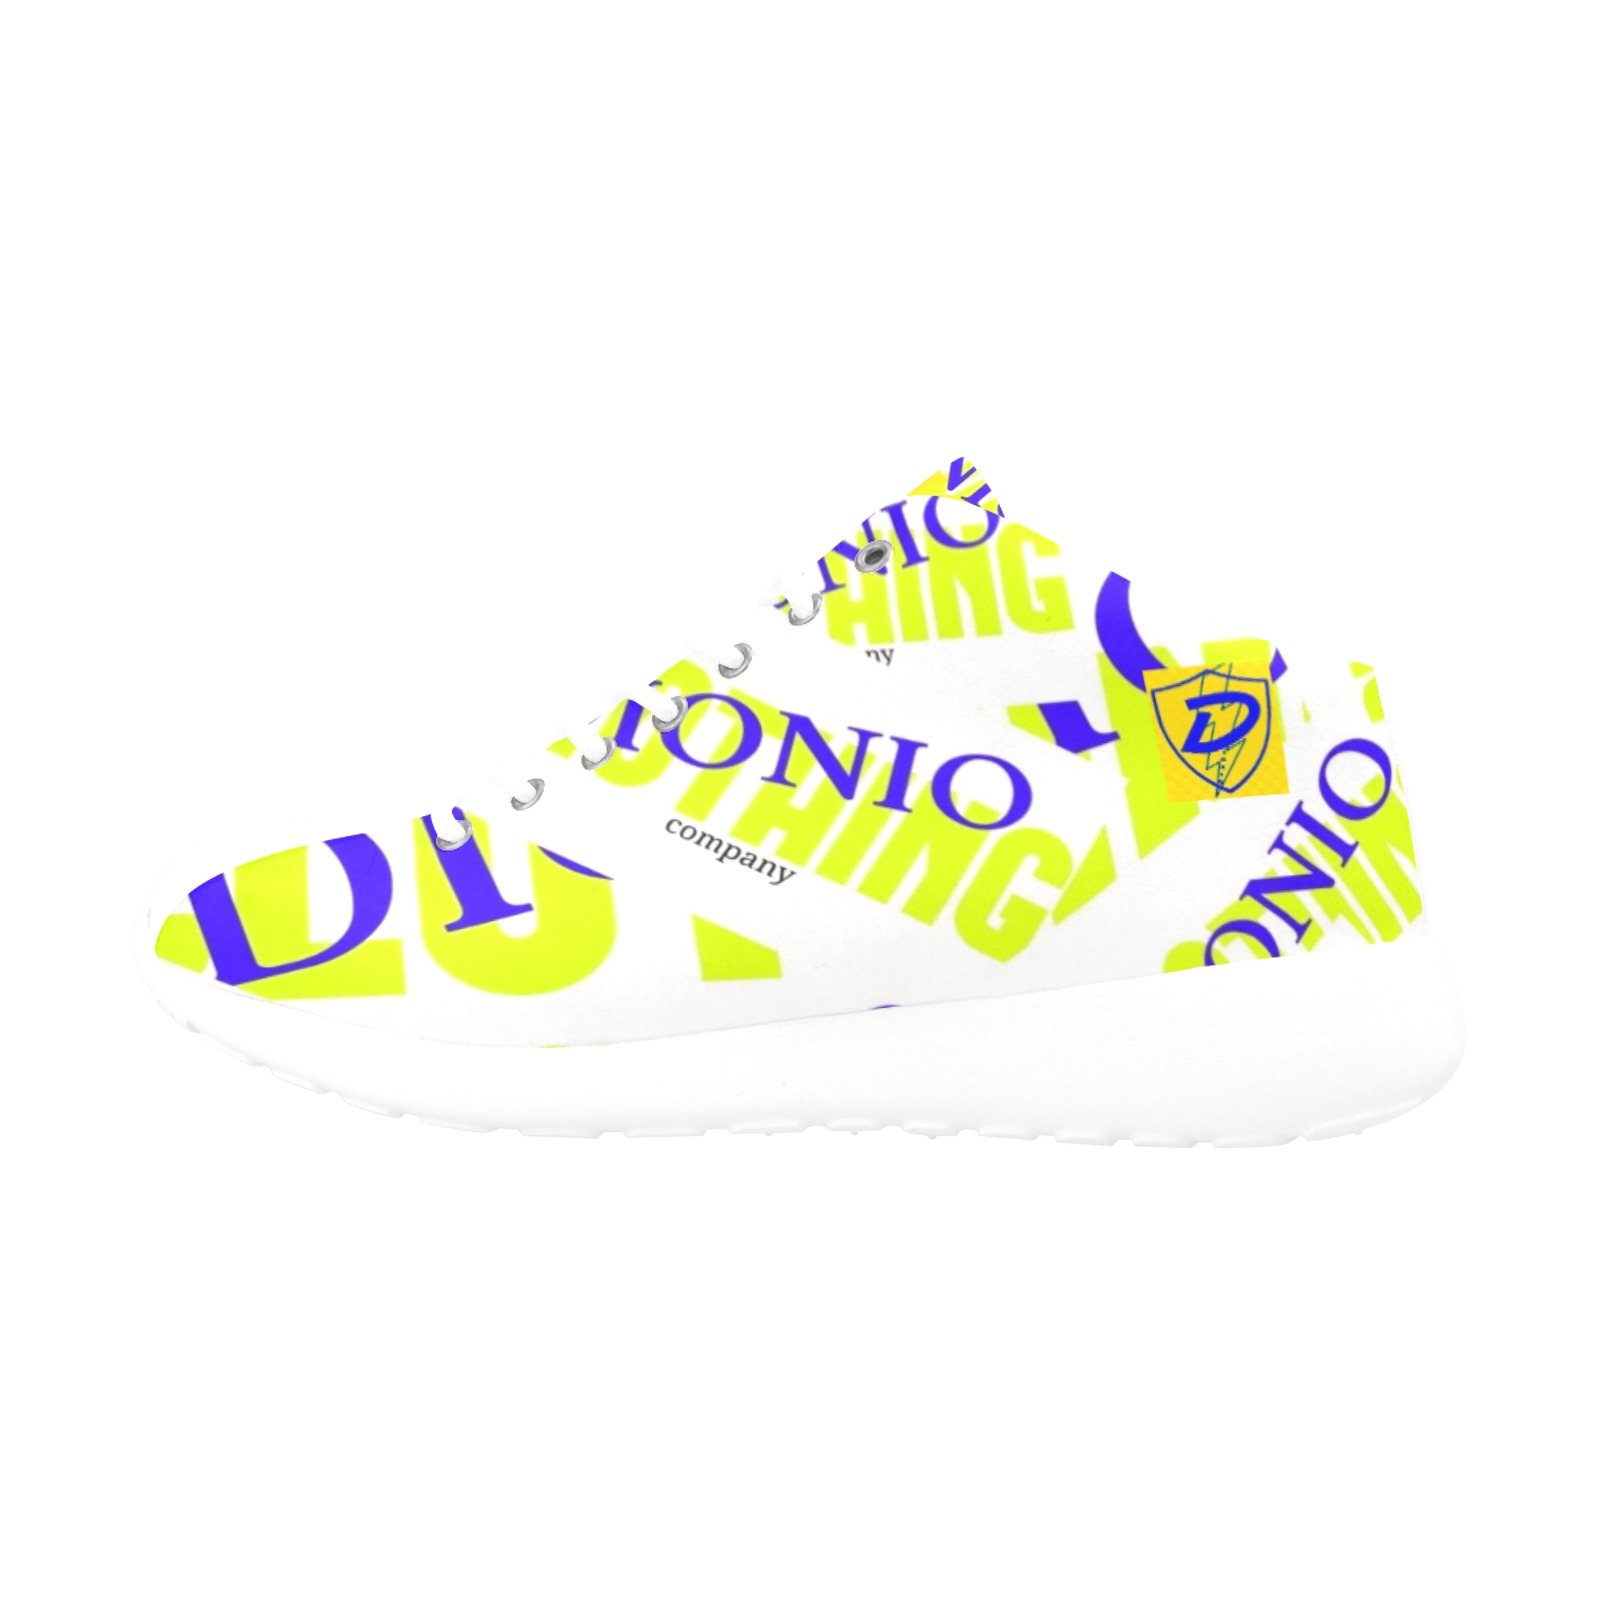 DIONIO - Company Sneakers (White,Blue, & Yelow) Men's Basketball Training Shoes (Model 47502)